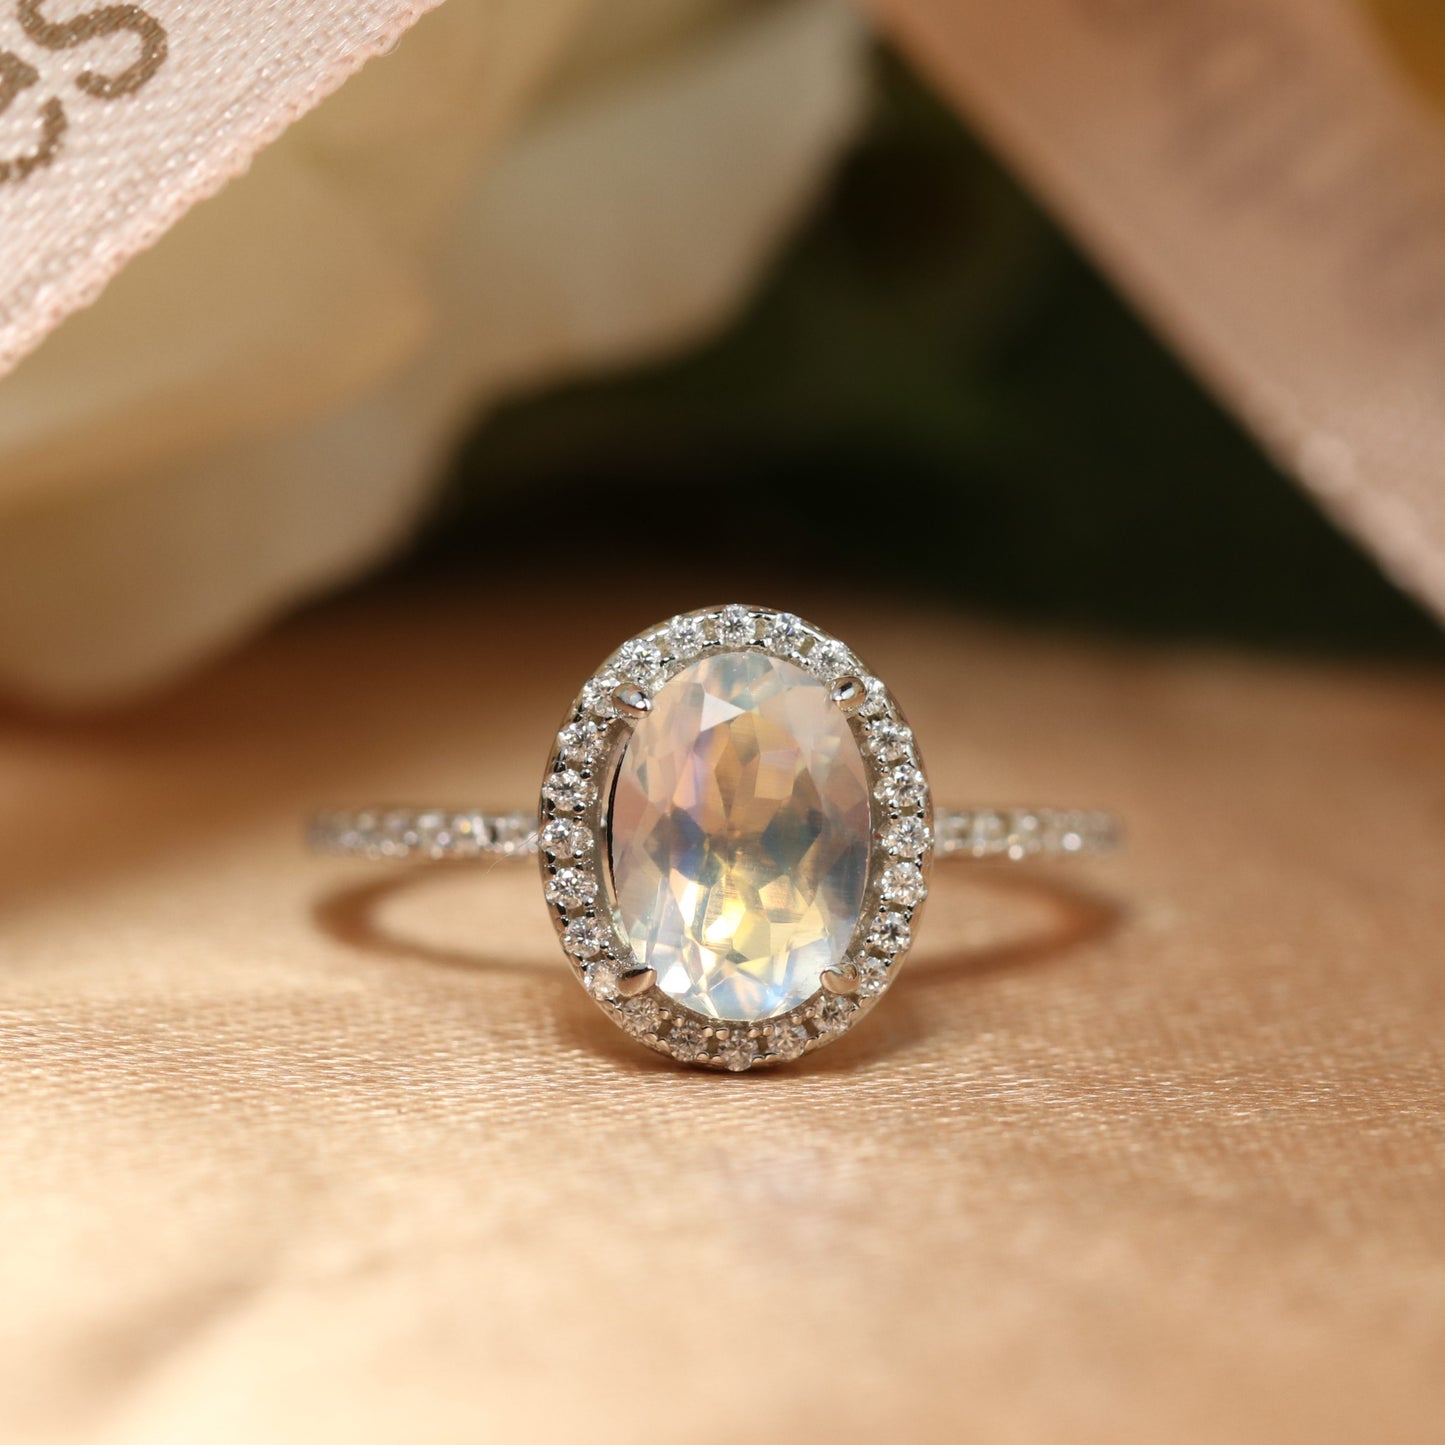 Classic 1.5 carat oval cut Moonstone Halo Wedding Engagement Ring with Diamonds on Sale